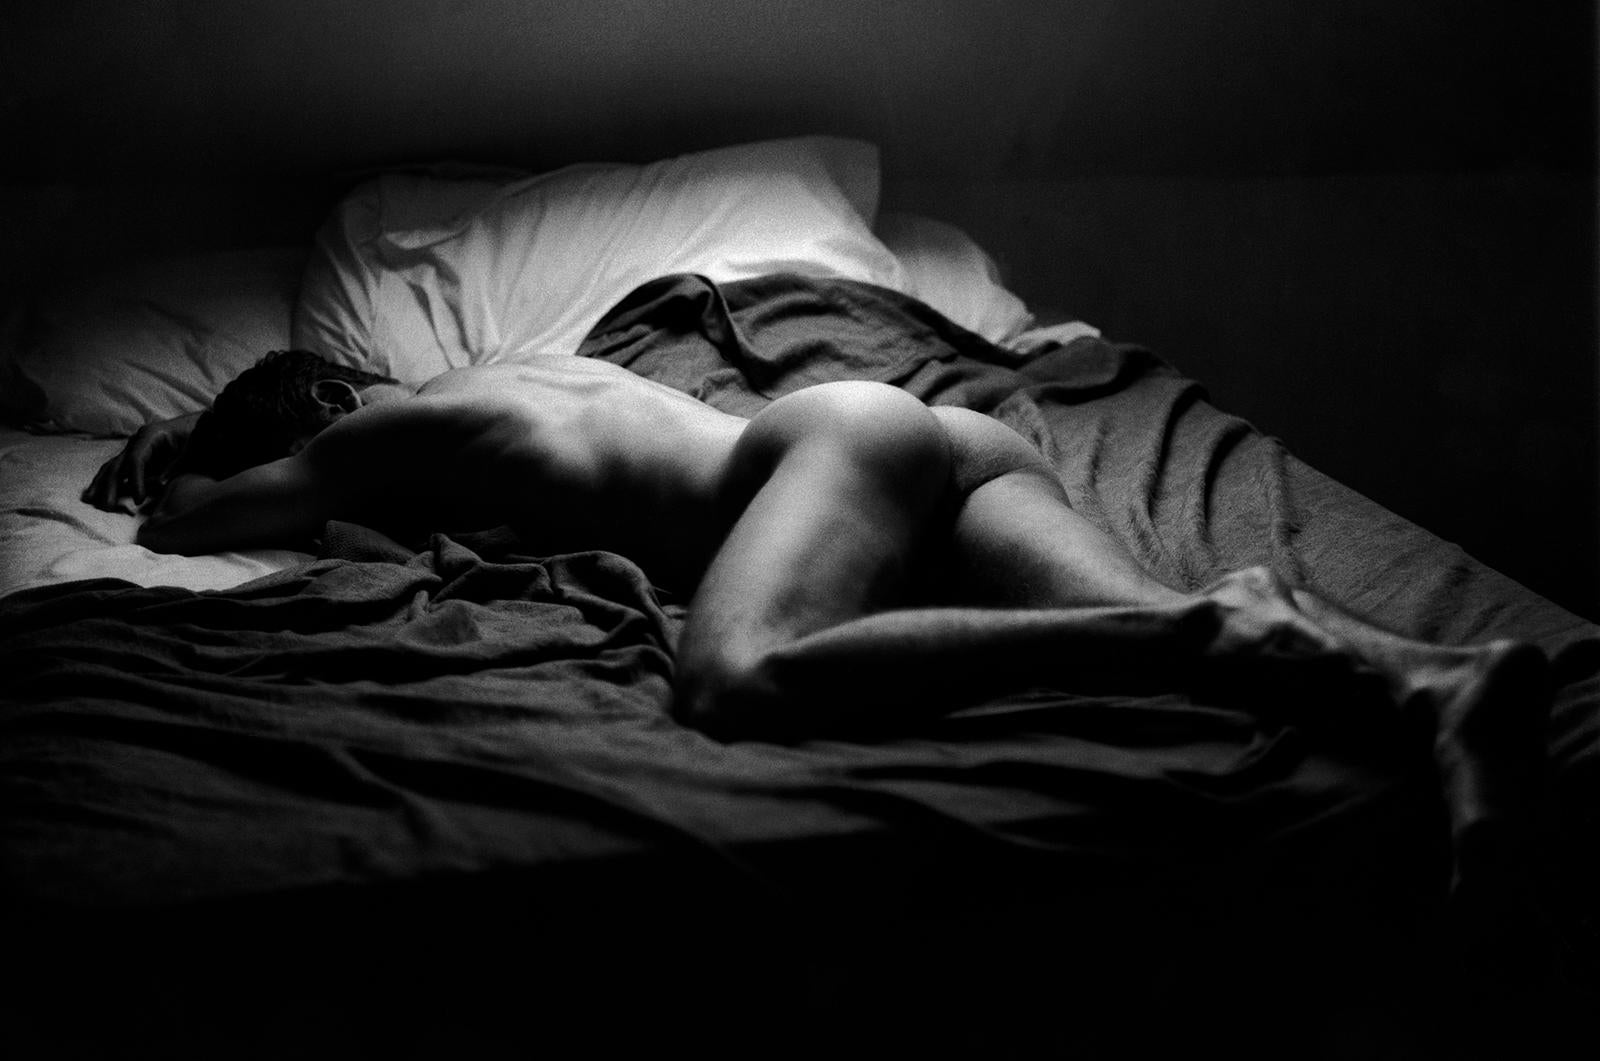 Ian Sanderson Portrait Photograph - Signed limited edition nude print, Black white Contemporary, Man on bed - Craig